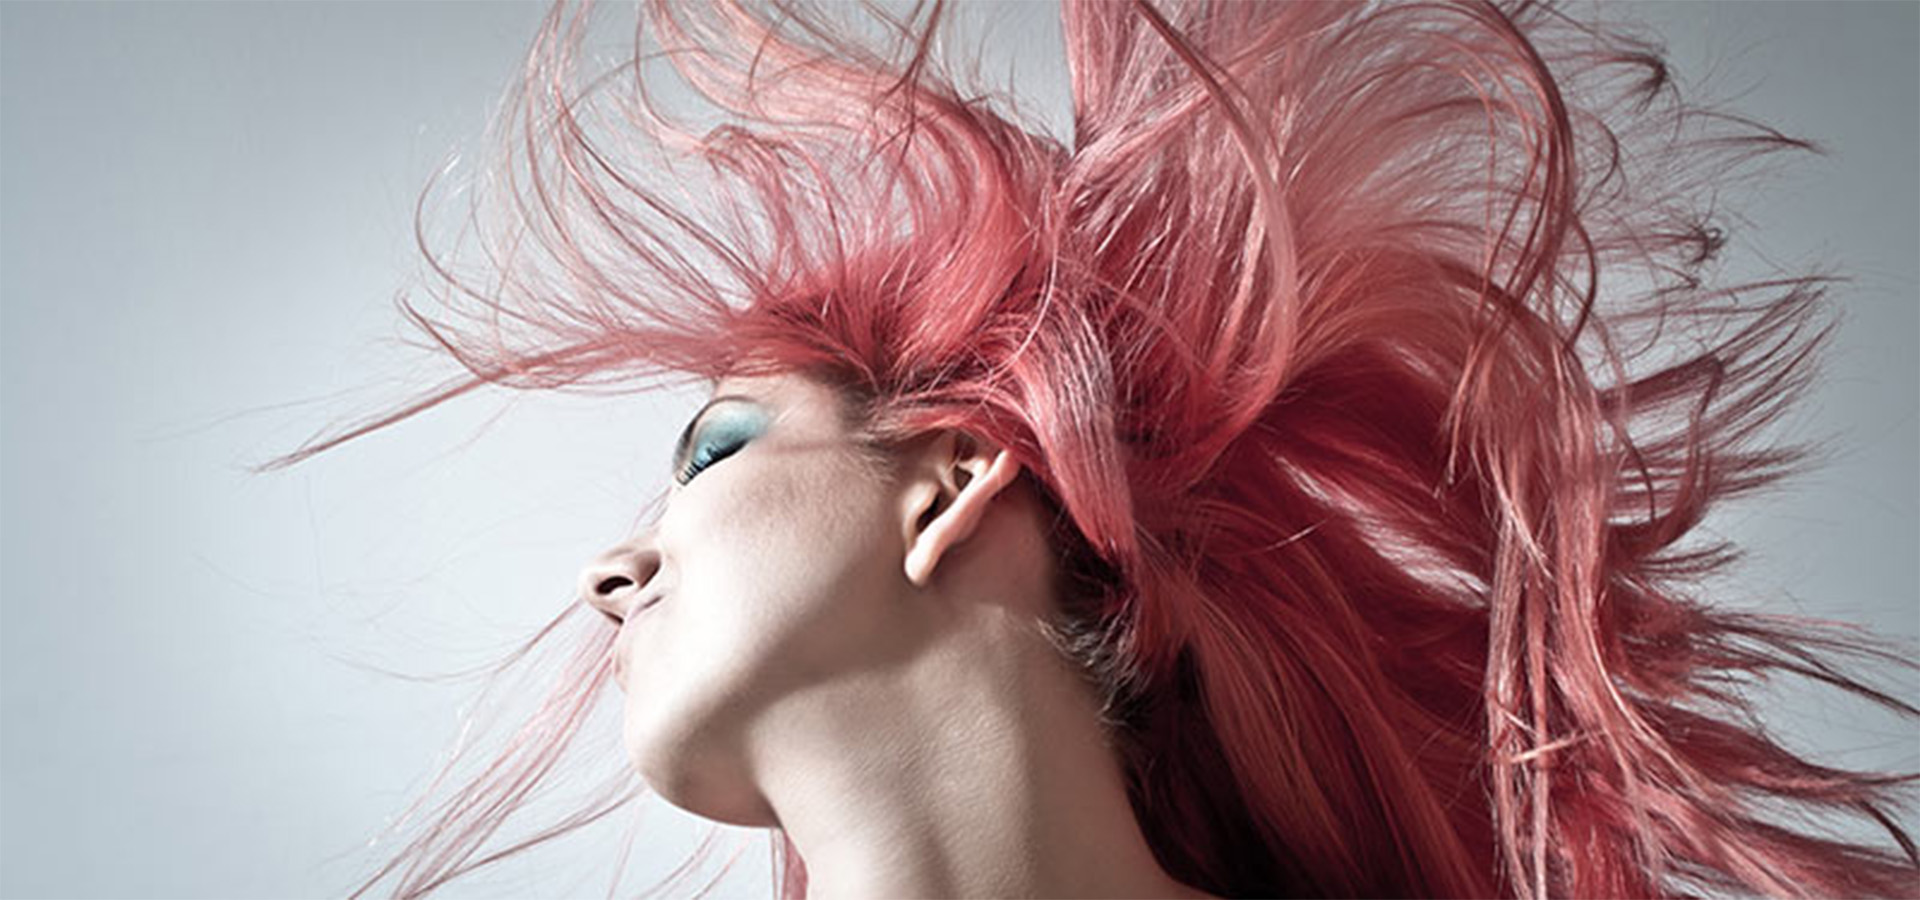 Image of woman with pink hair